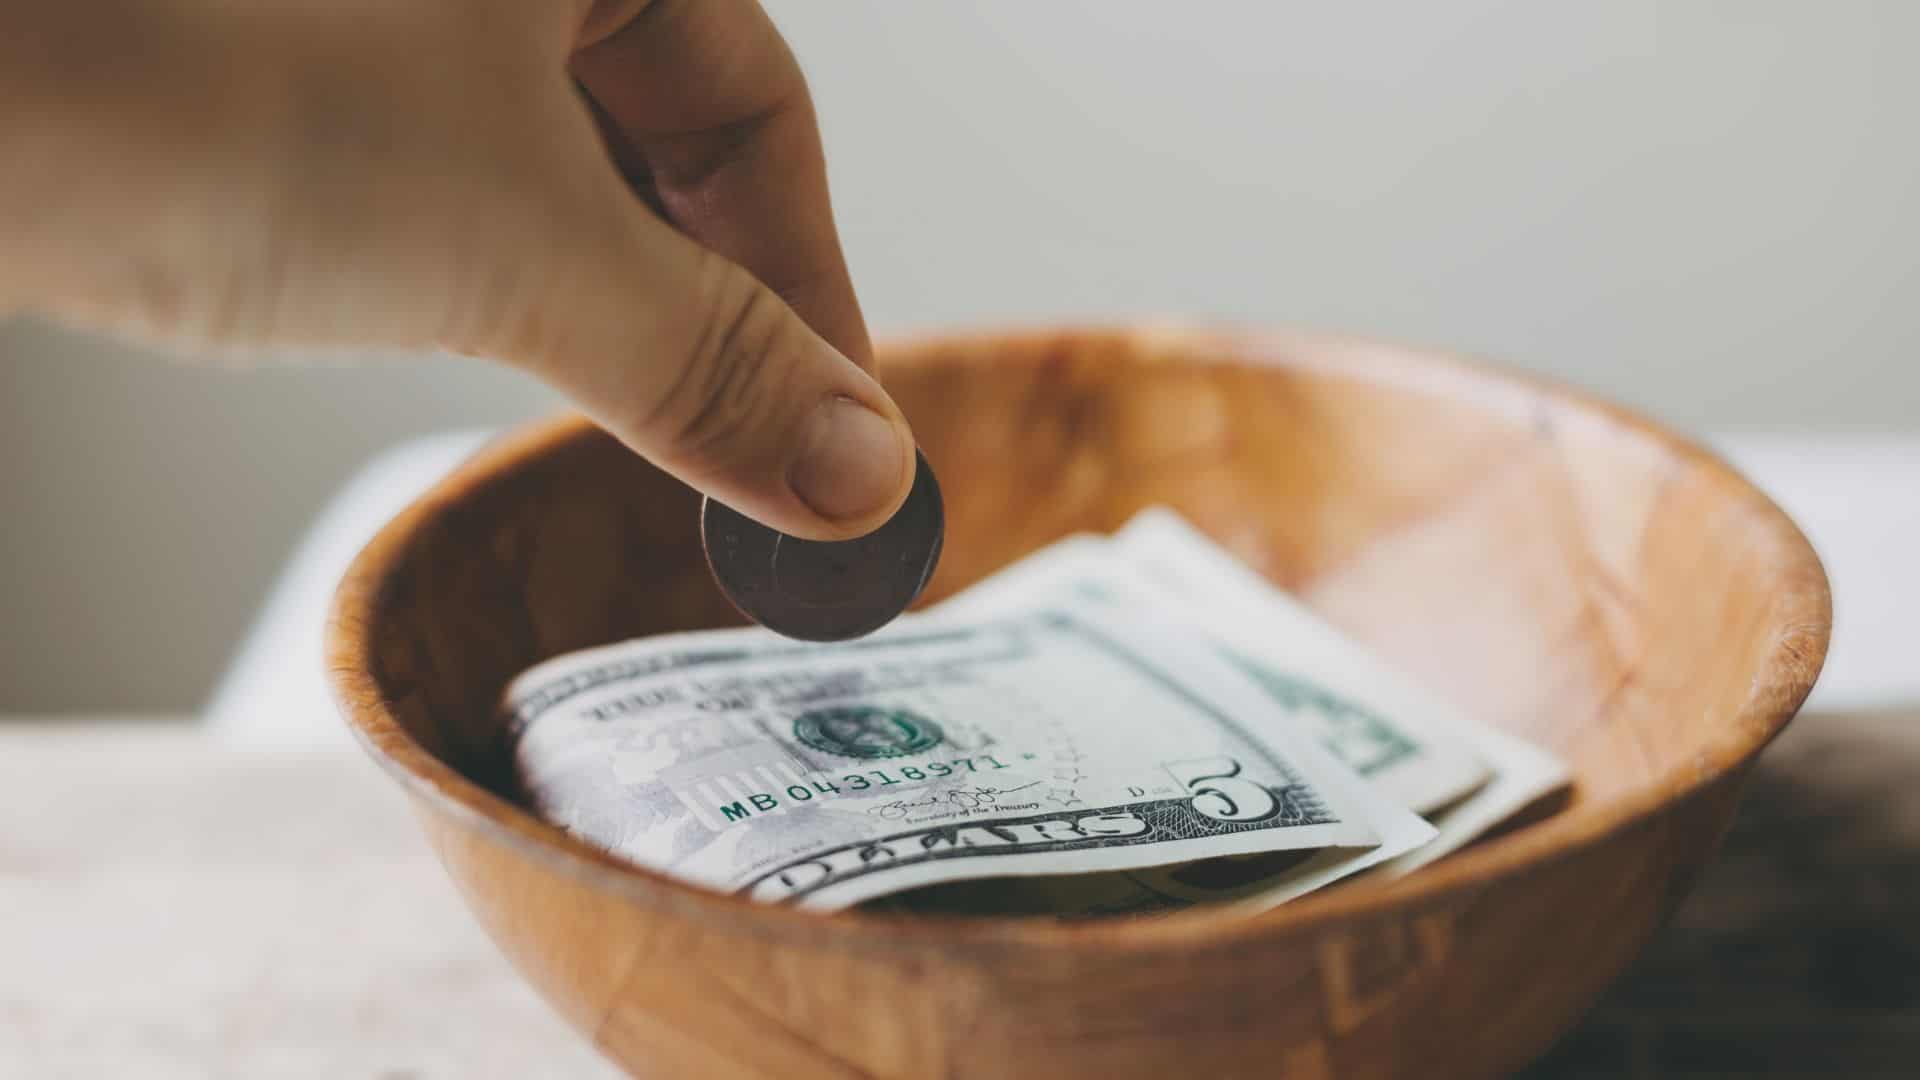 Tithes and Offerings: What Does the Bible Say About Giving to the Church?